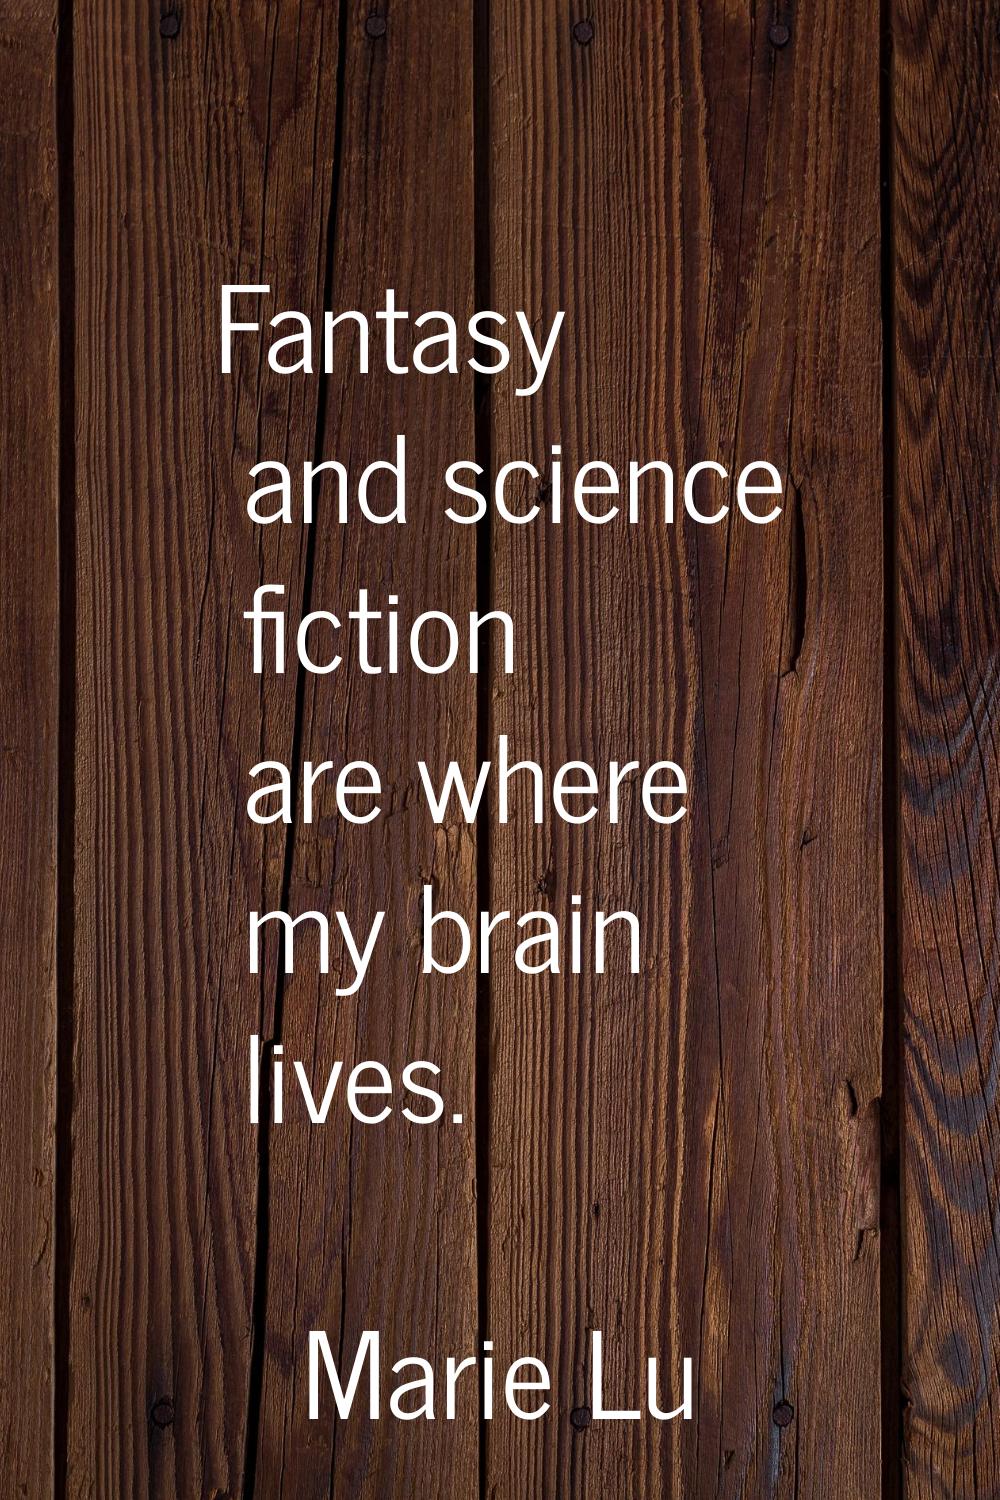 Fantasy and science fiction are where my brain lives.